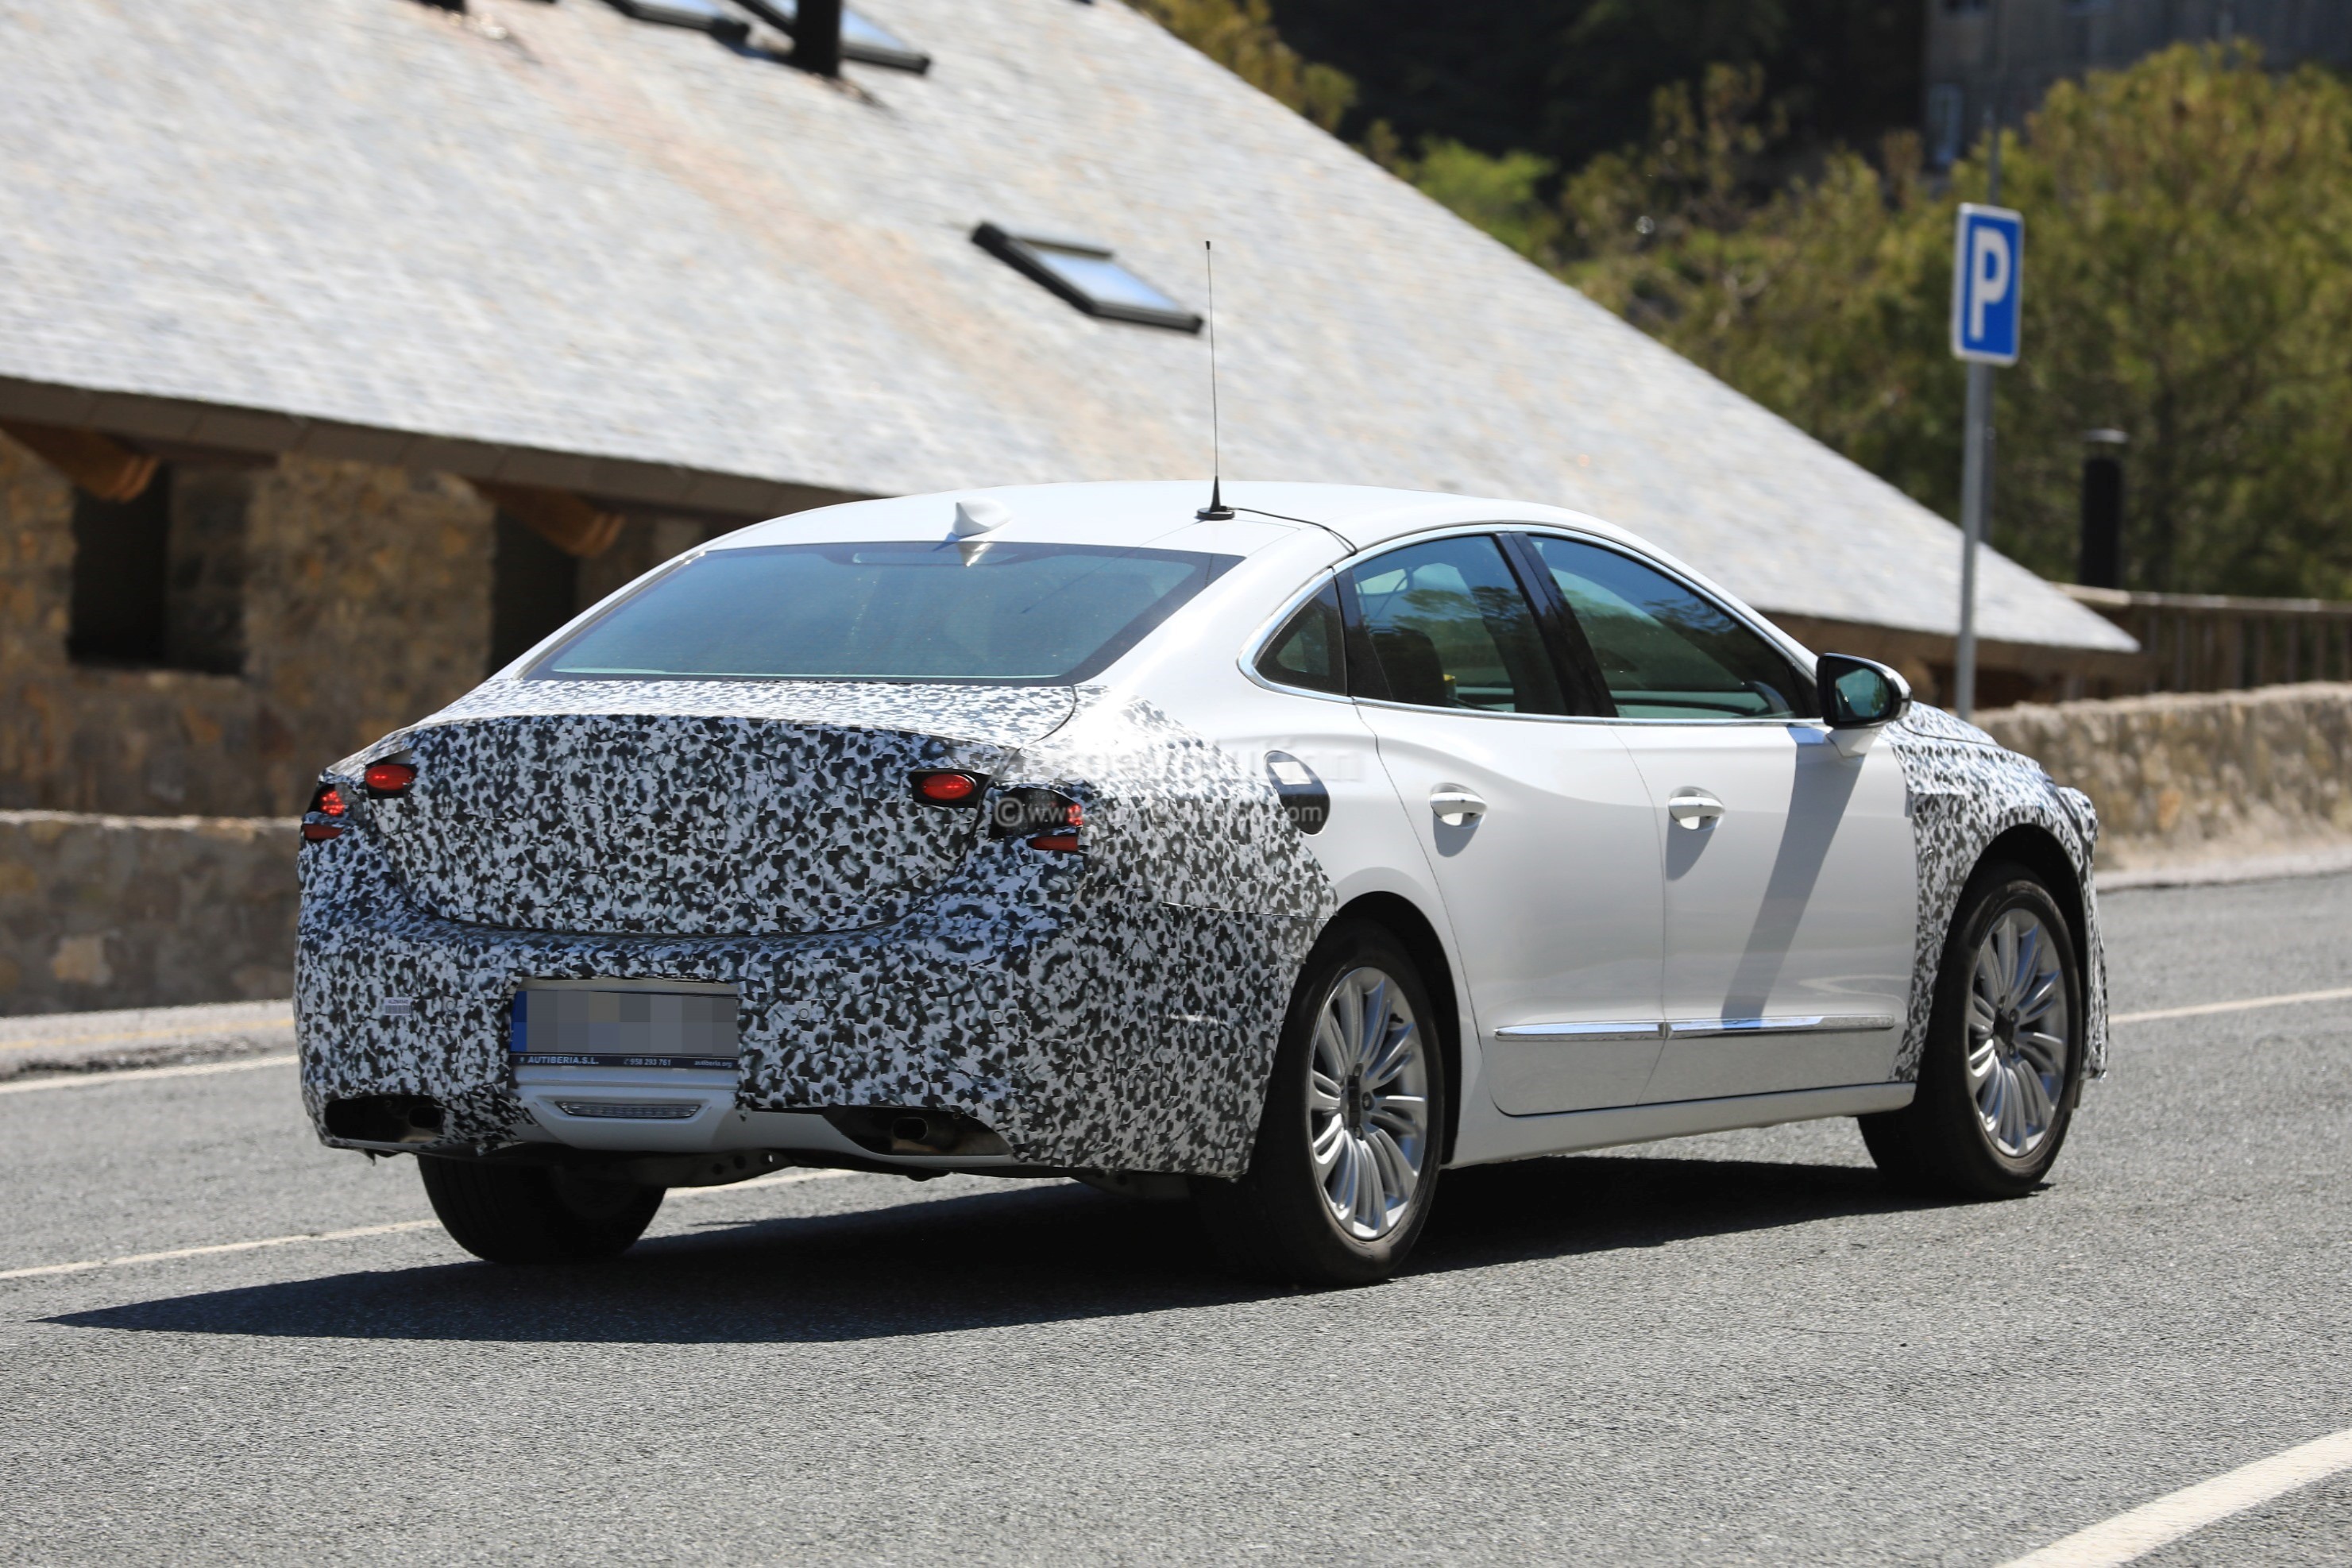 2020 Buick LaCrosse Facelift Canceled From U.S. Lineup - autoevolution